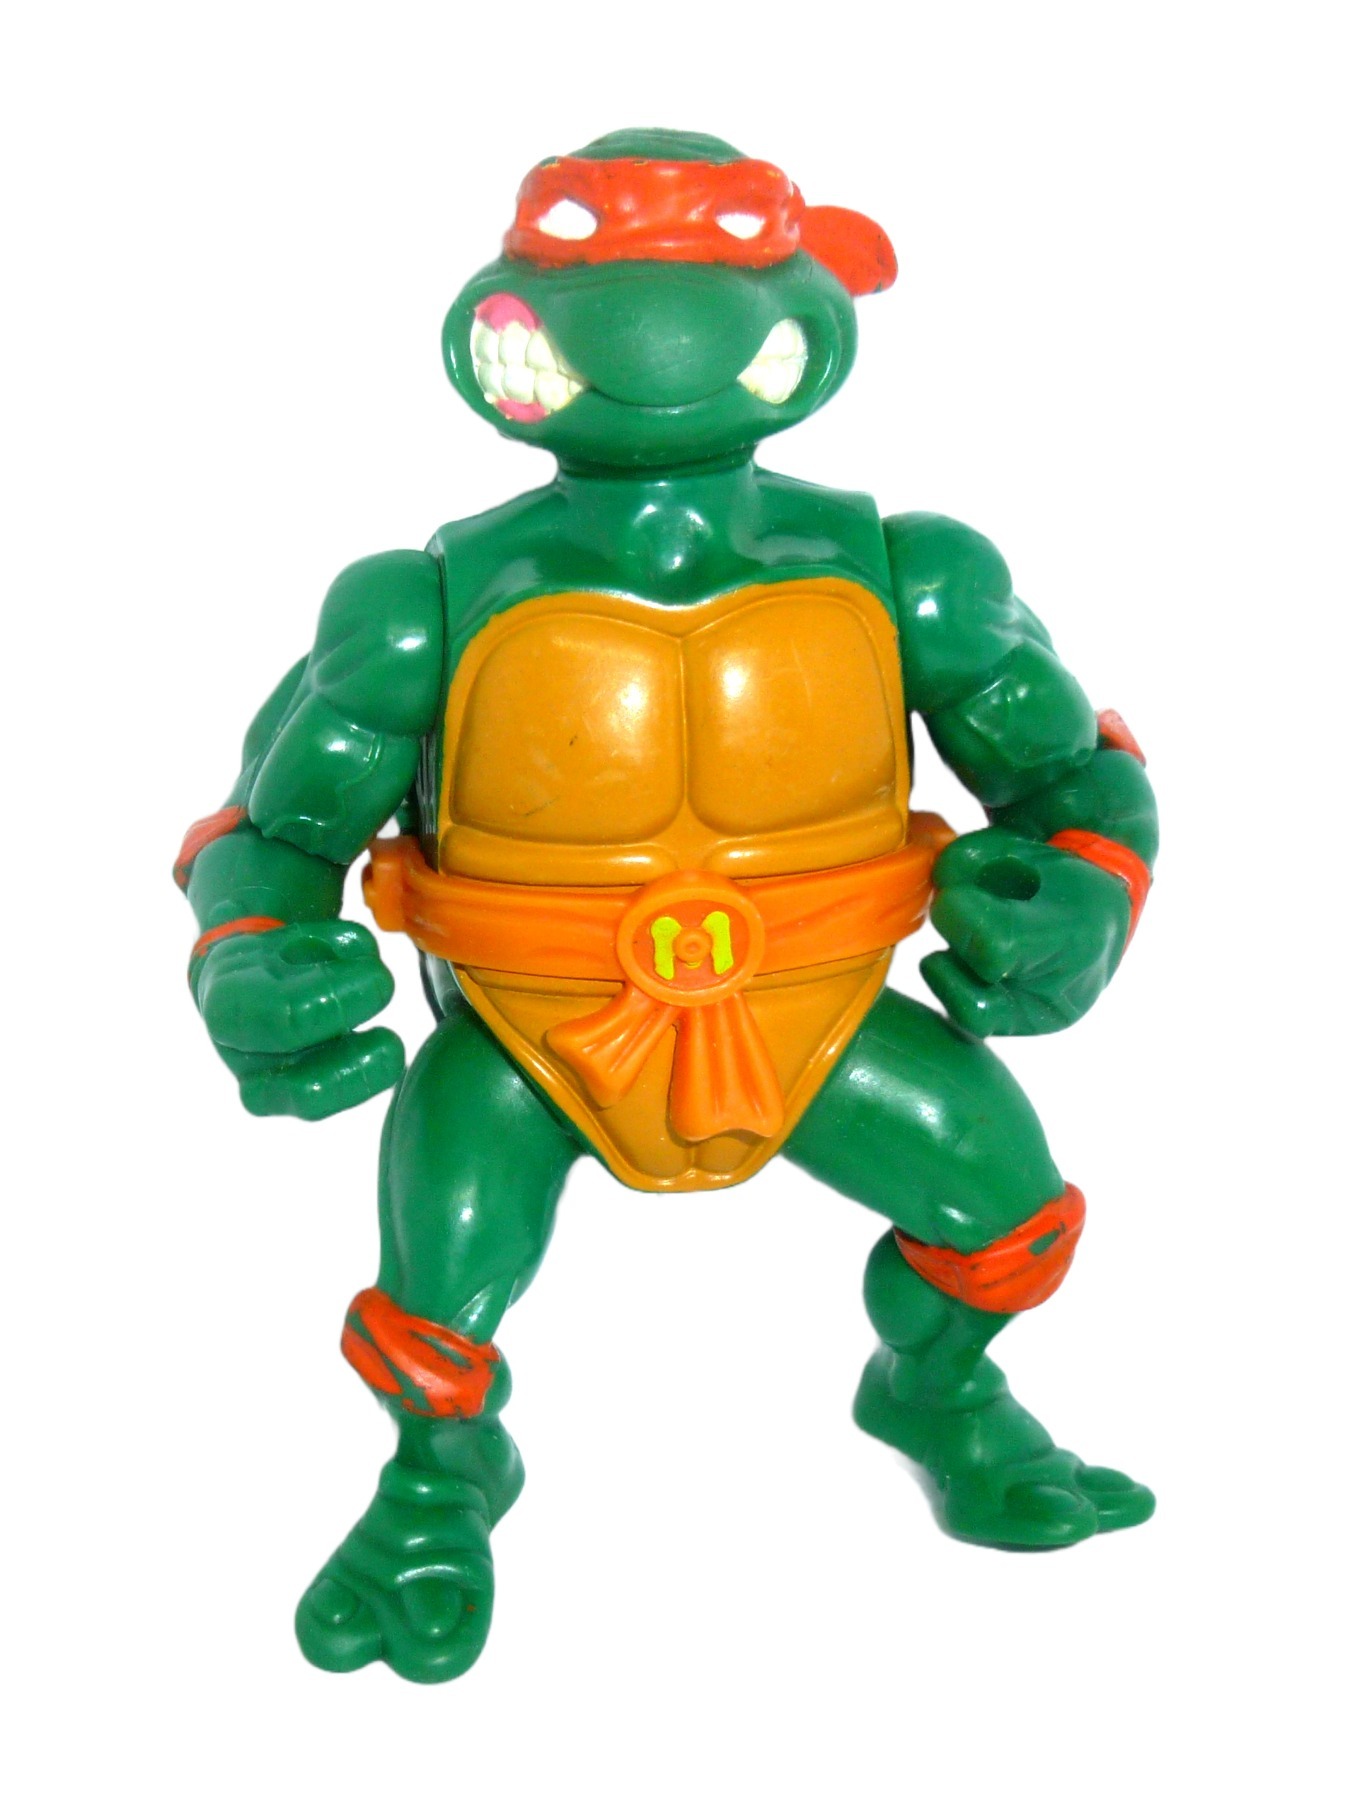 Michelangelo With Storage Shell 1990 Mirage Studios / Playmates Toys